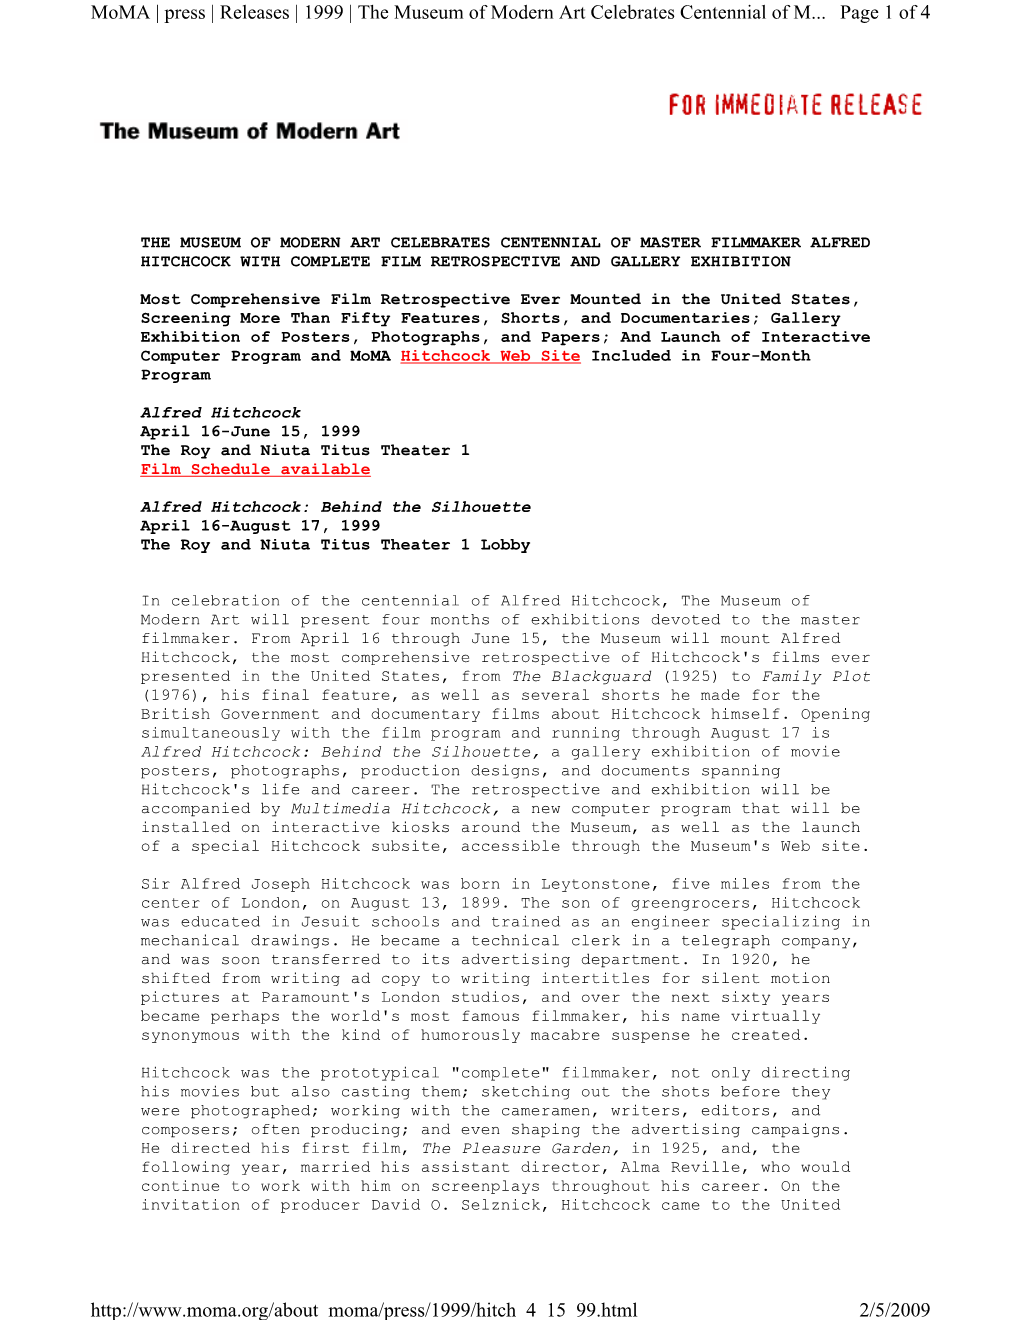 Page 1 of 4 Moma | Press | Releases | 1999 | the Museum of Modern Art